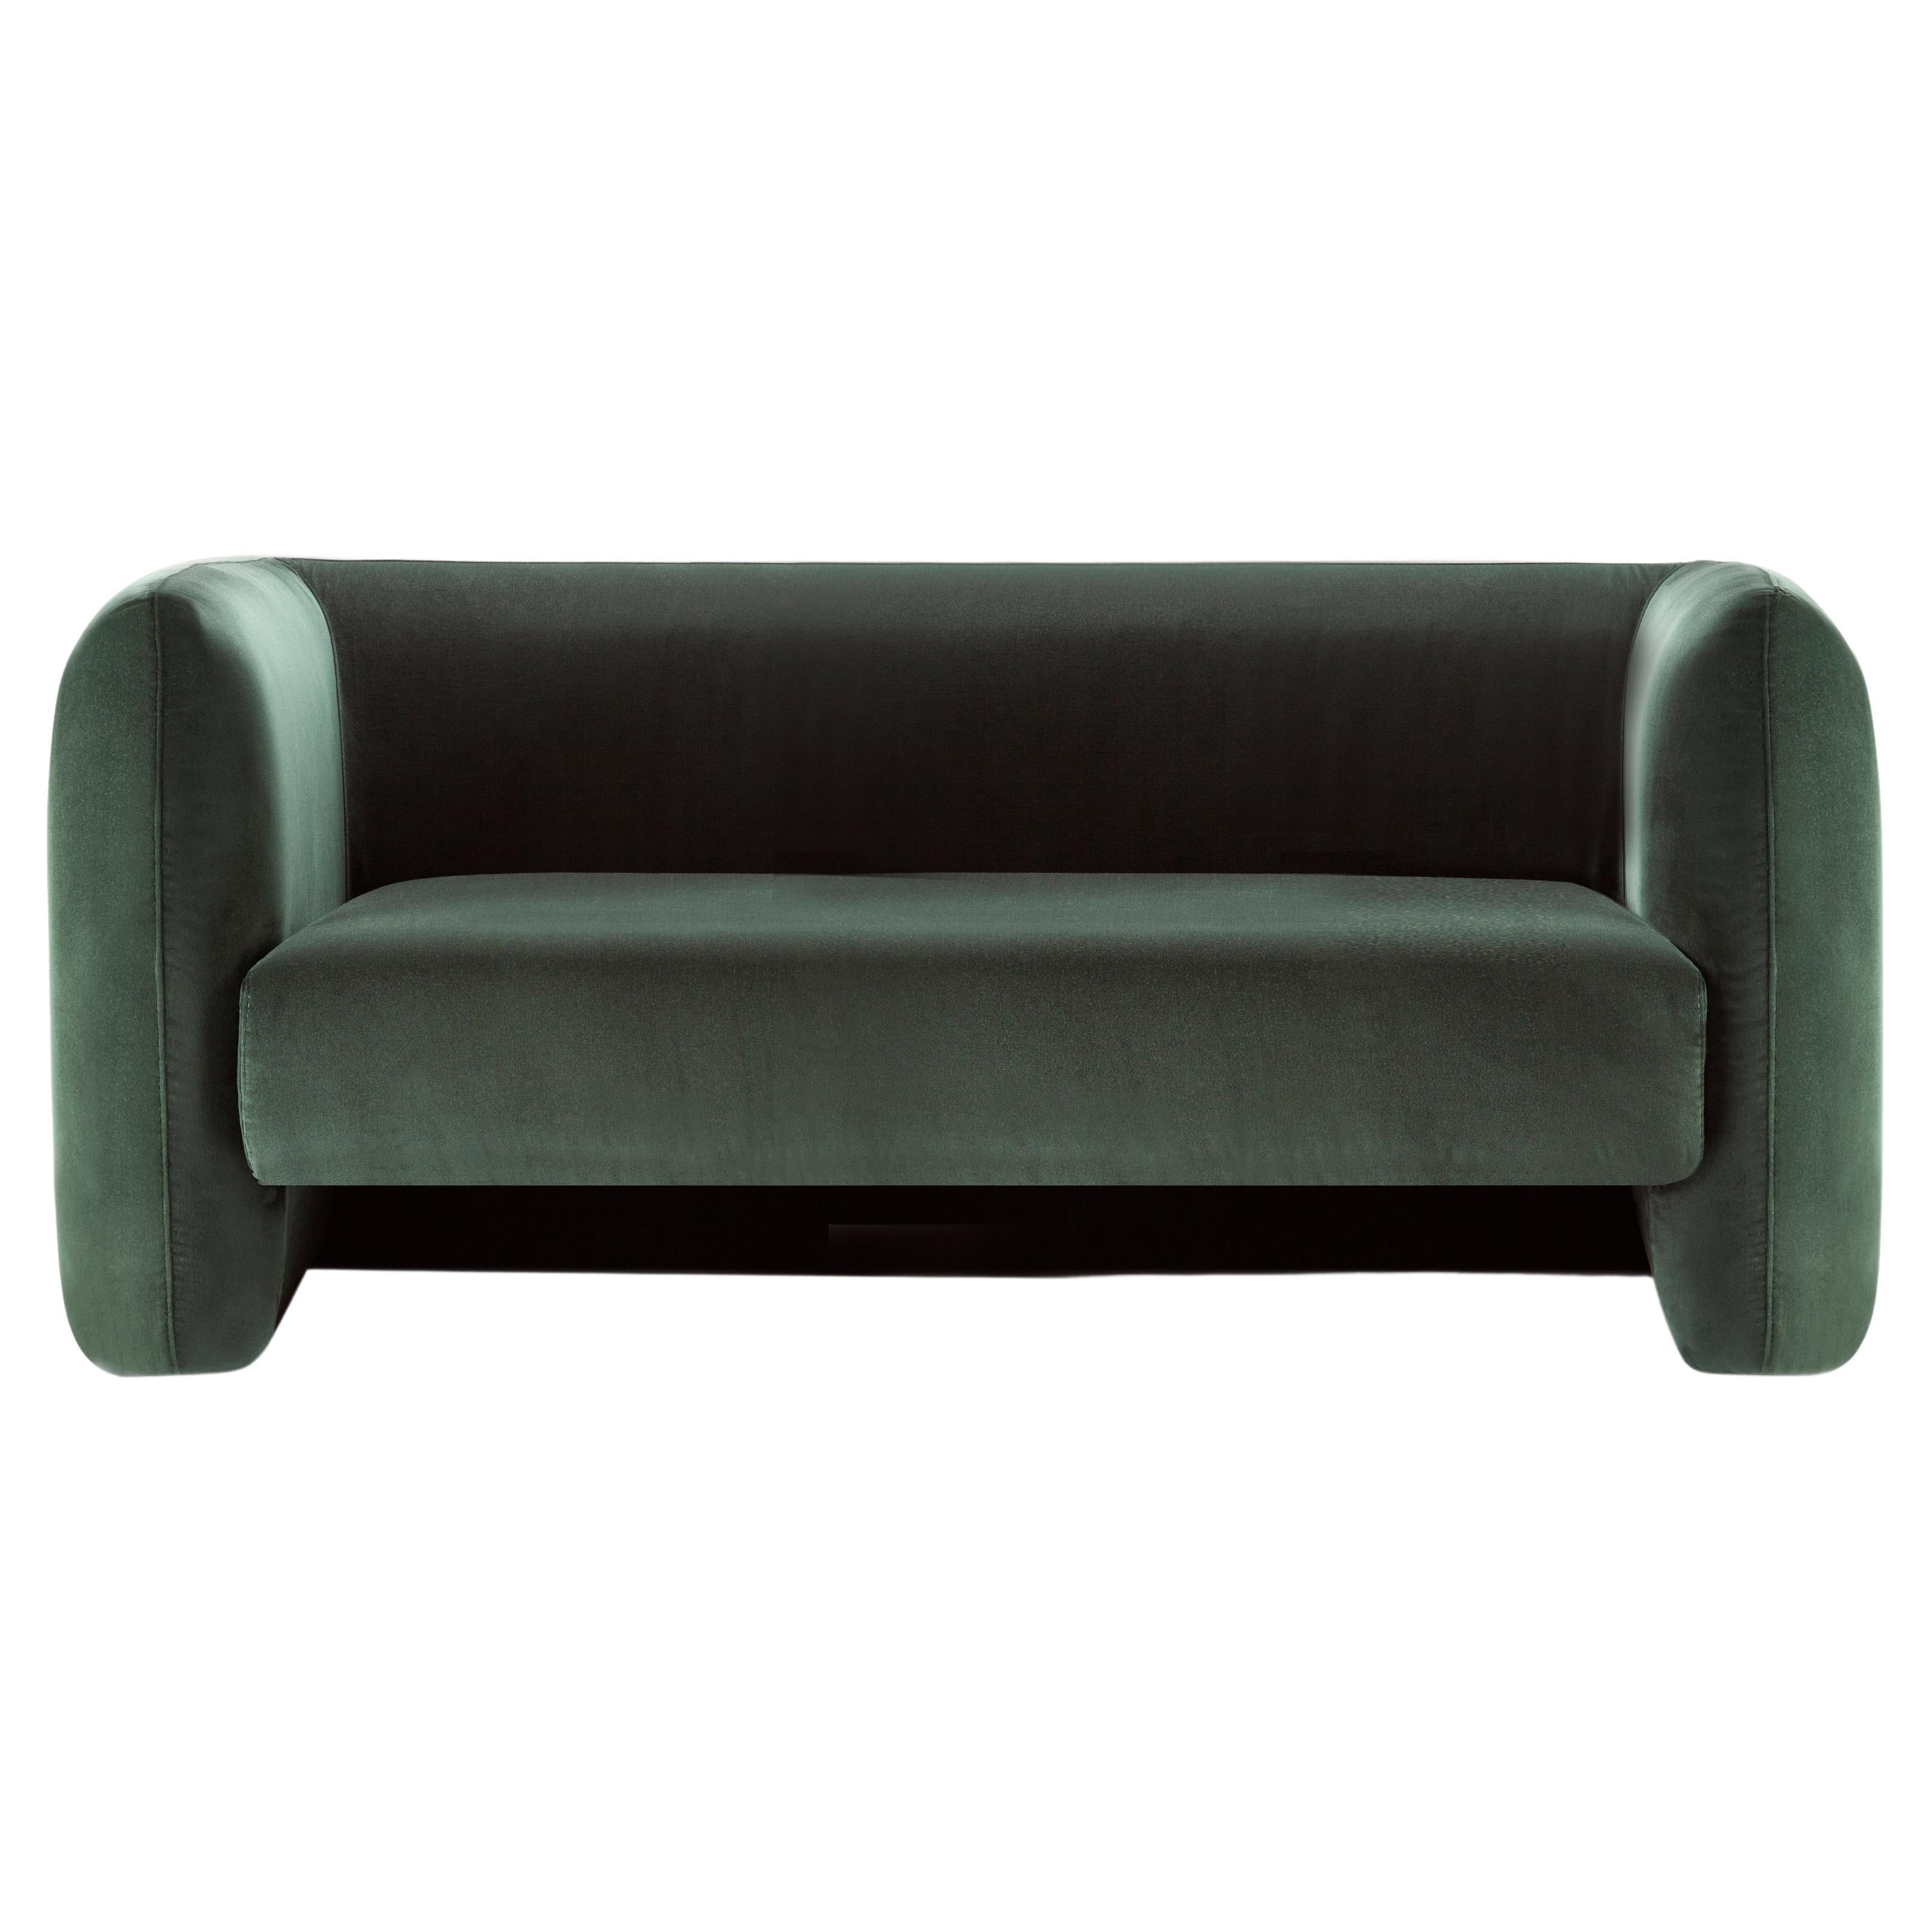 Contemporary Modern Jacob Sofa in Green Velvet Fabric by Collector Studio